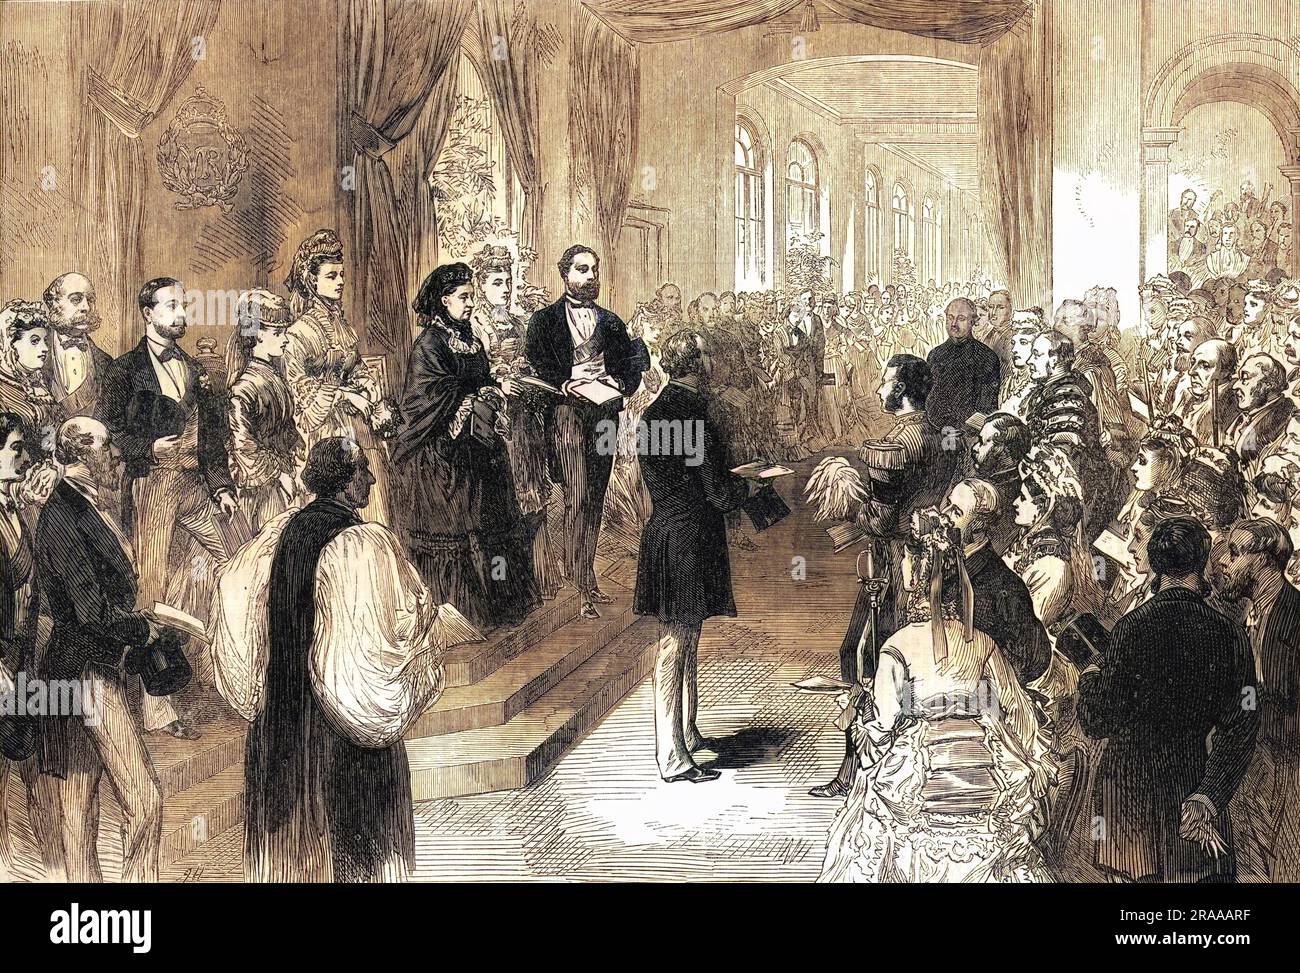 Queen Victoria opens the newly completed St Thomas' Hospital, situated on the southern Thames Embankment in Lambeth, London, across the river from the Palace of Westminster. The Queen had laid the foundation stone in May 1868.     Date: June 1871 Stock Photo